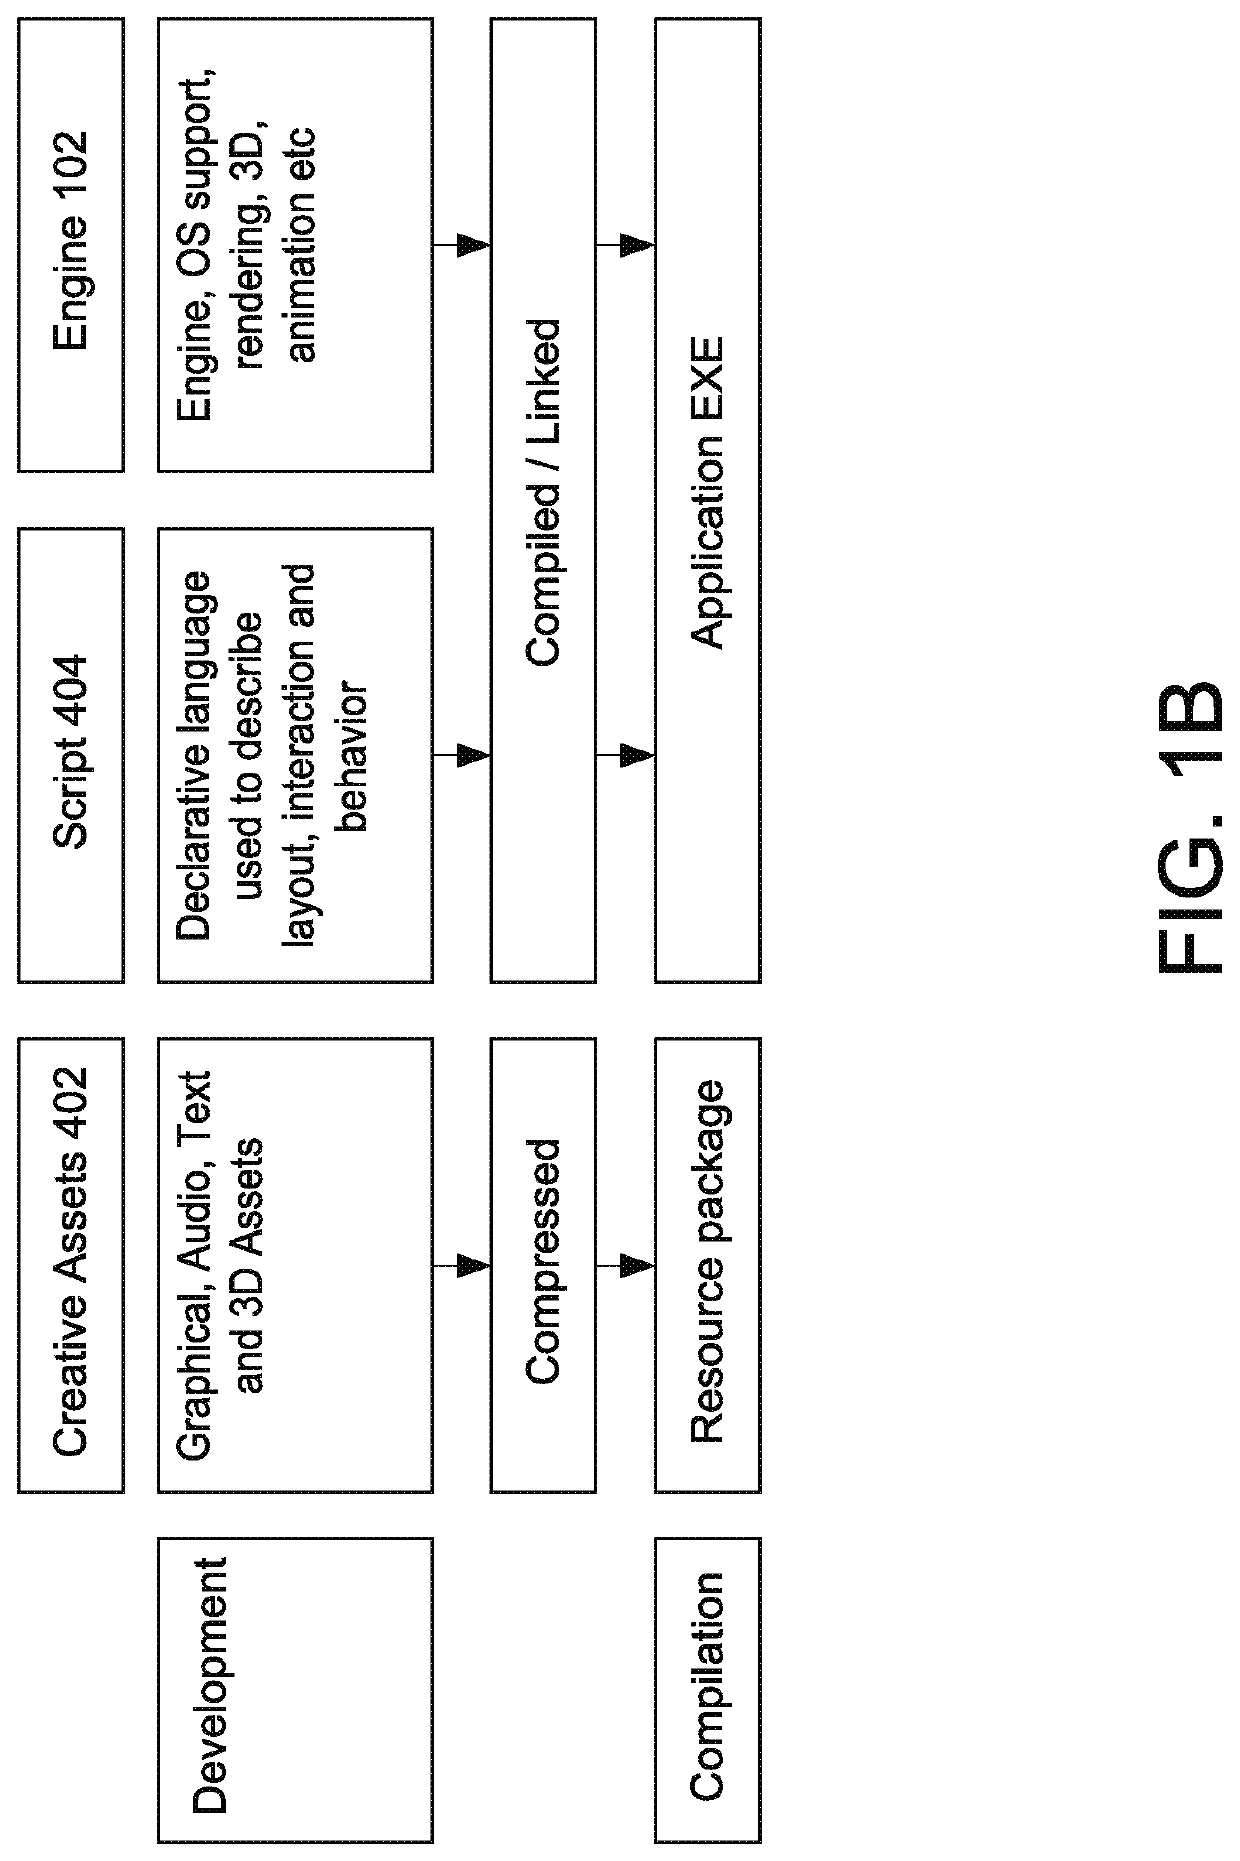 Server kit configured to execute custom workflows and methods therefor